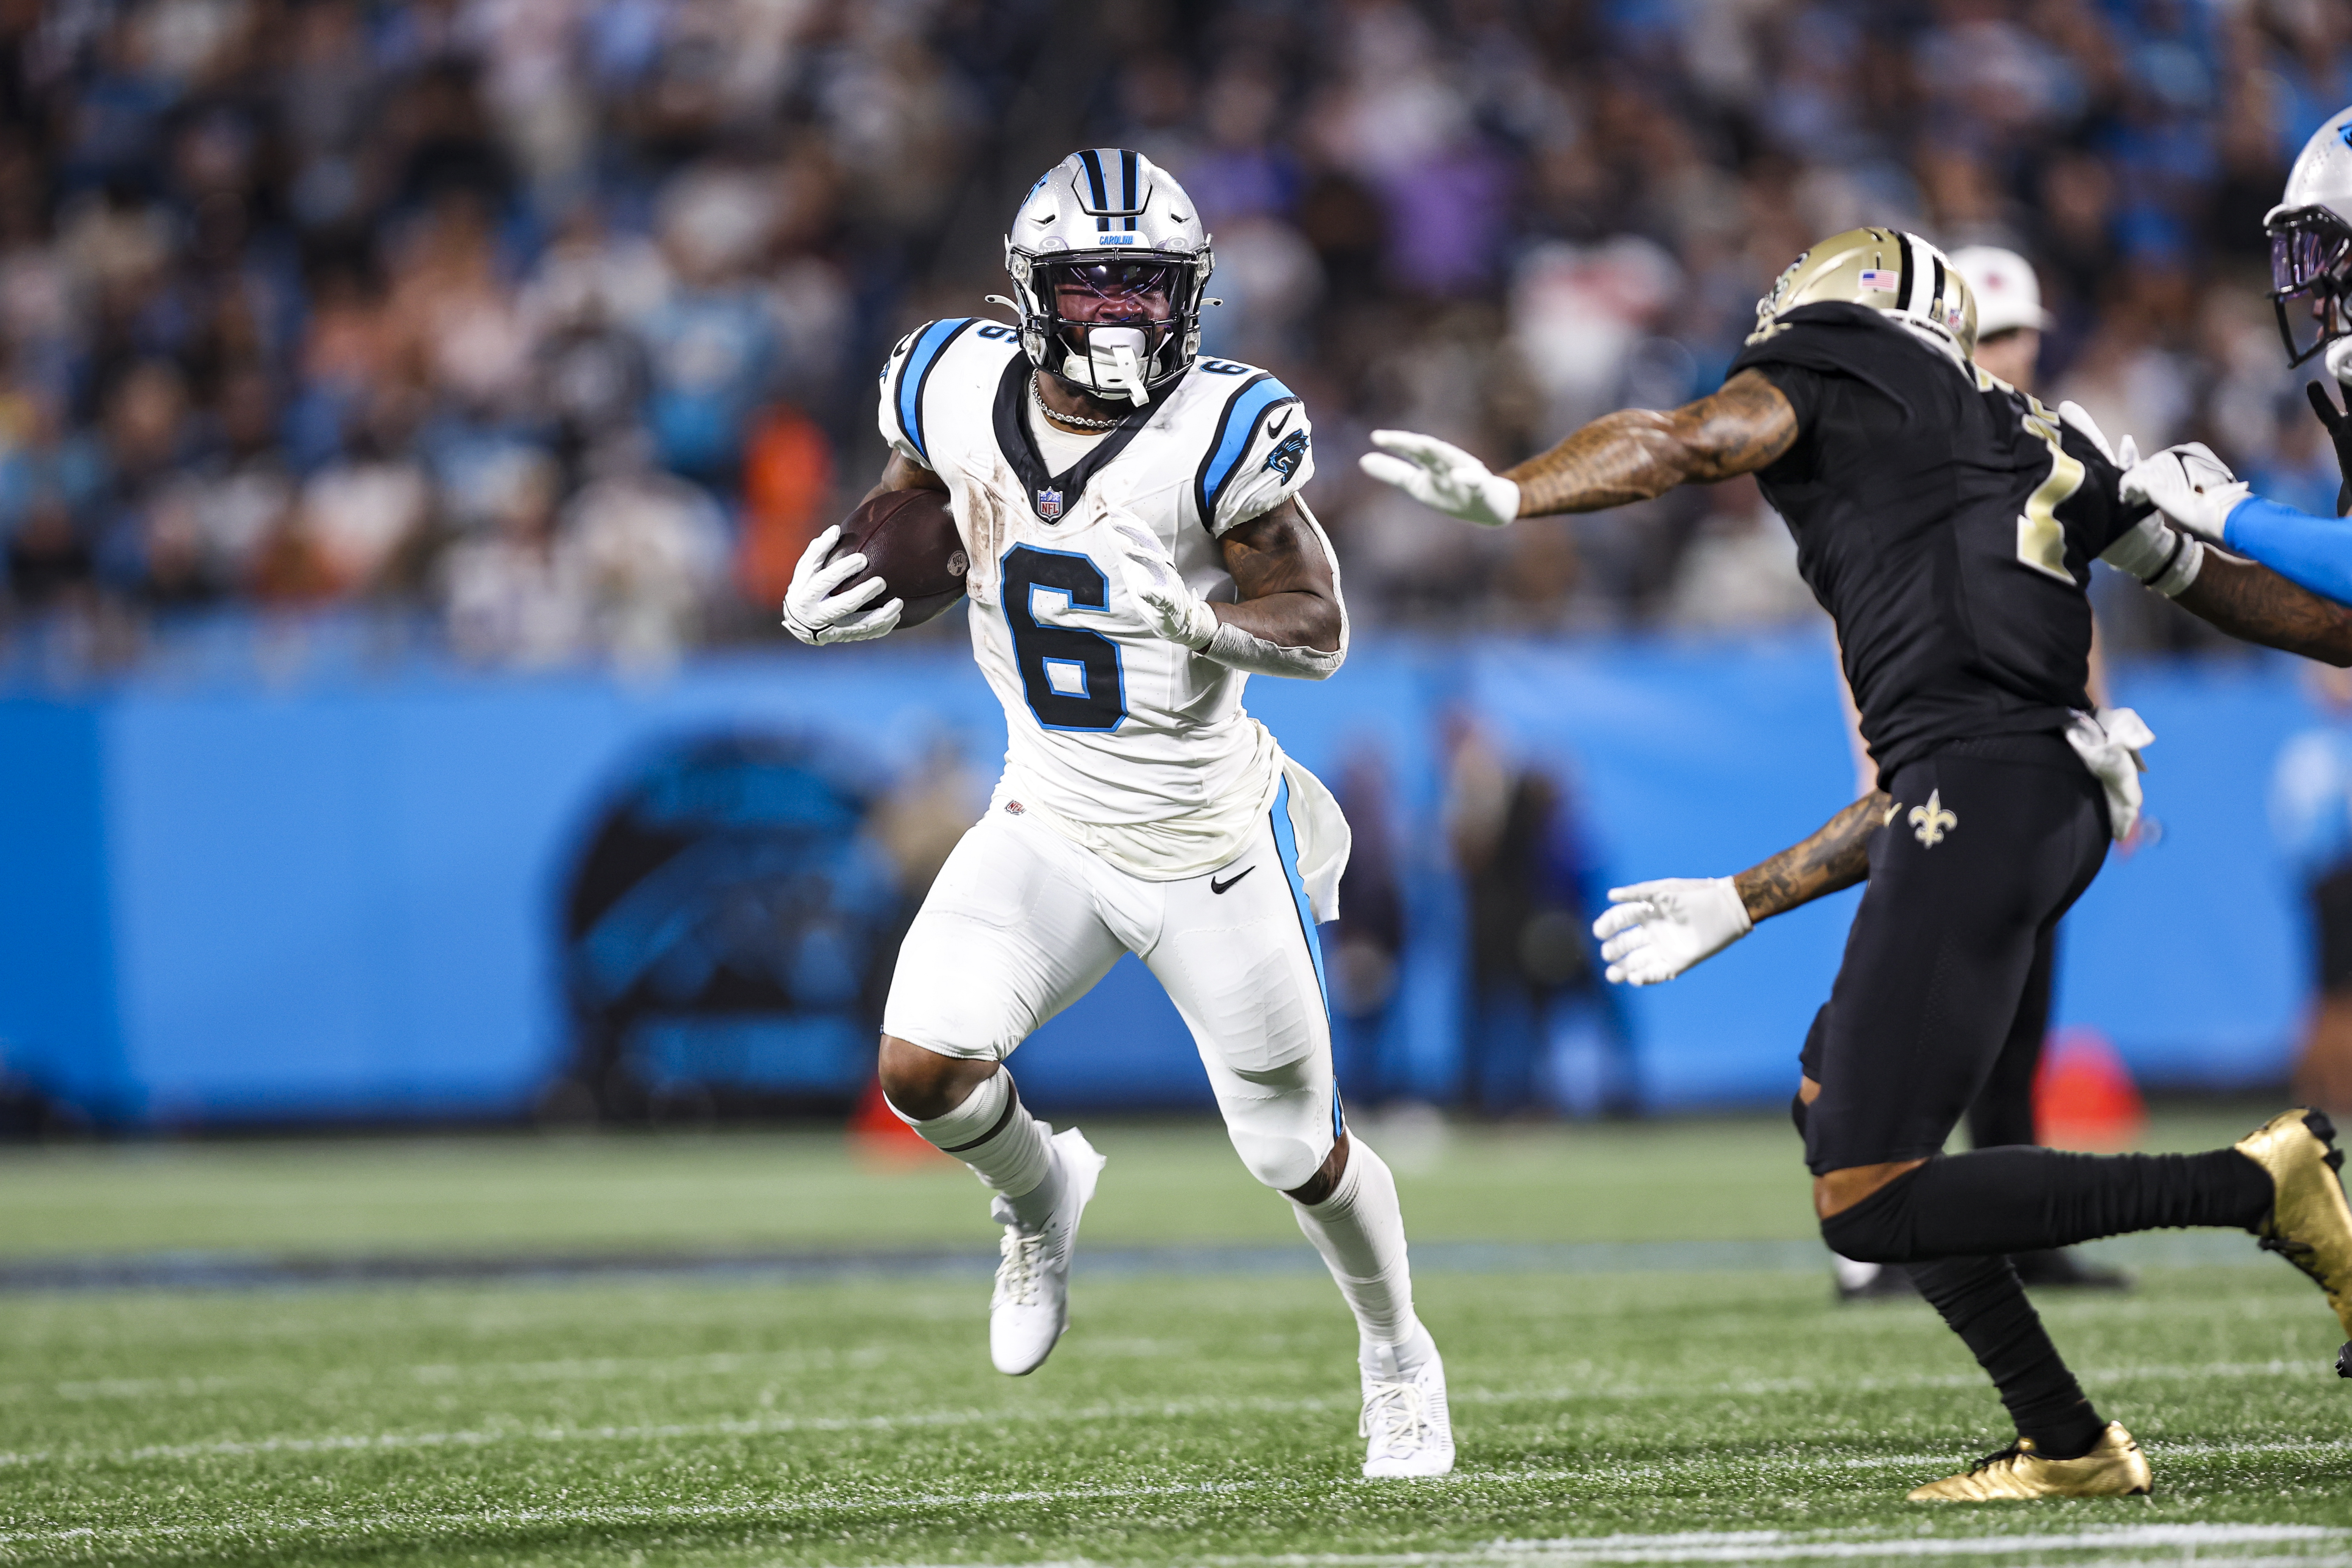 Miles Sanders #6 of the Carolina Panthers runs the ball during an NFL football game against the New Orleans Saints at Bank of America Stadium on September 18, 2023 in Charlotte, North Carolina.